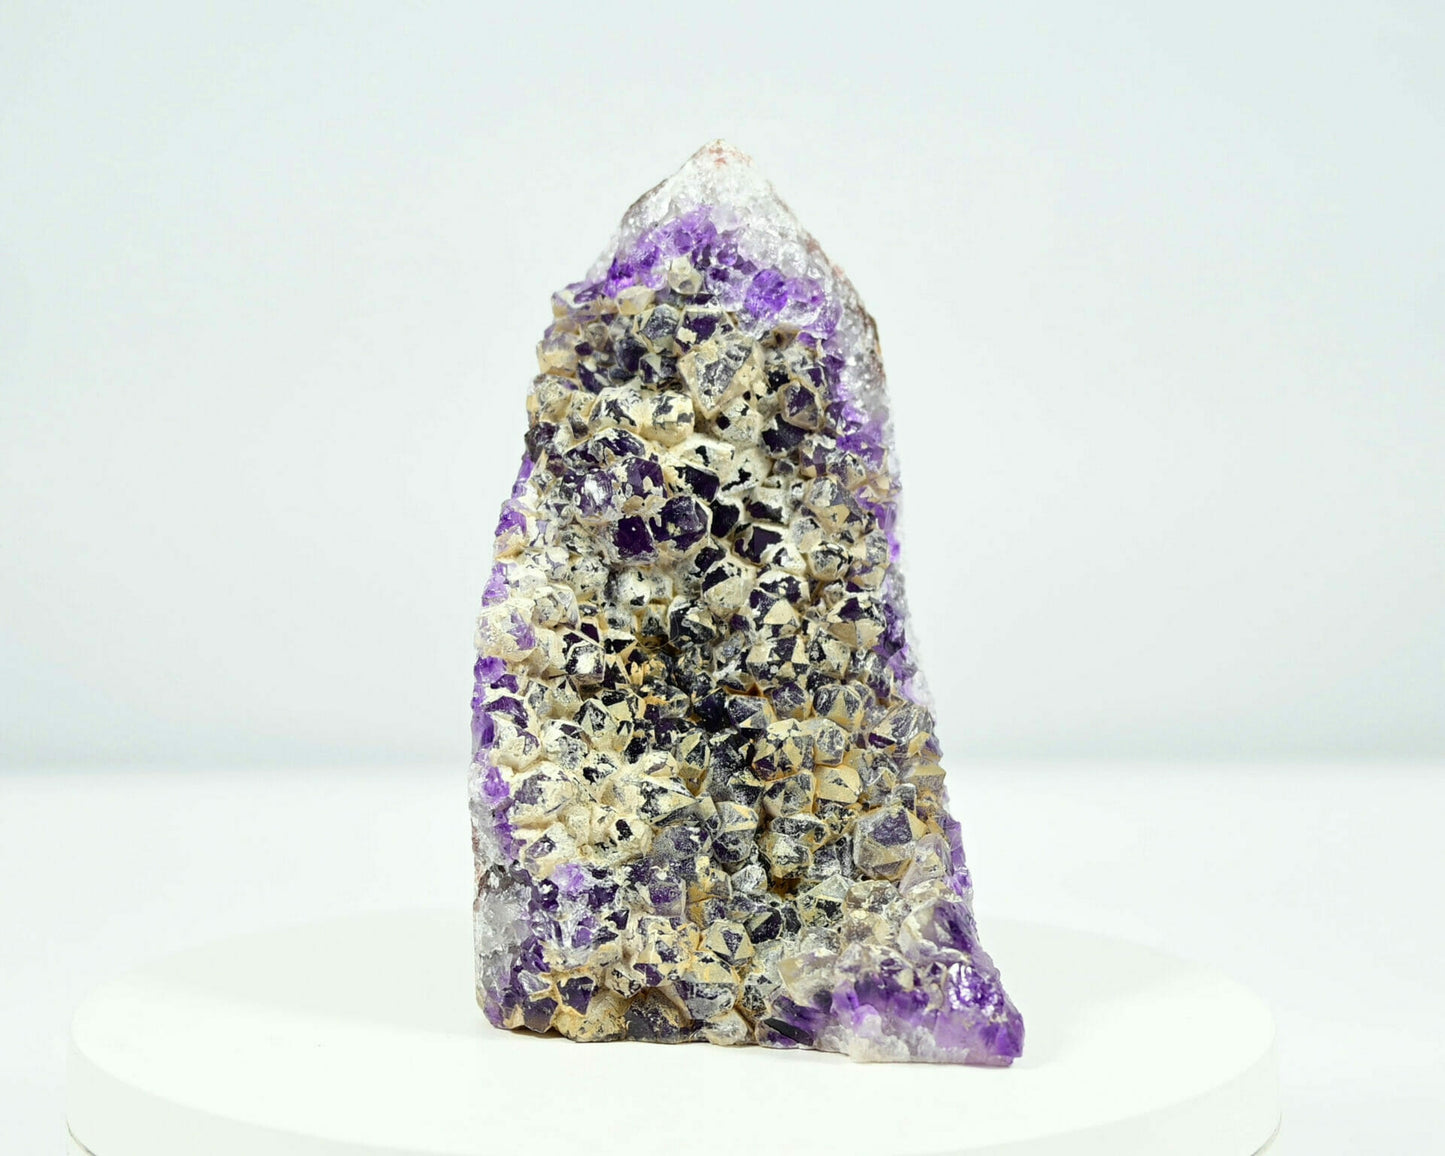 Unusal rare Amethyst covered with yellow second generation crystals